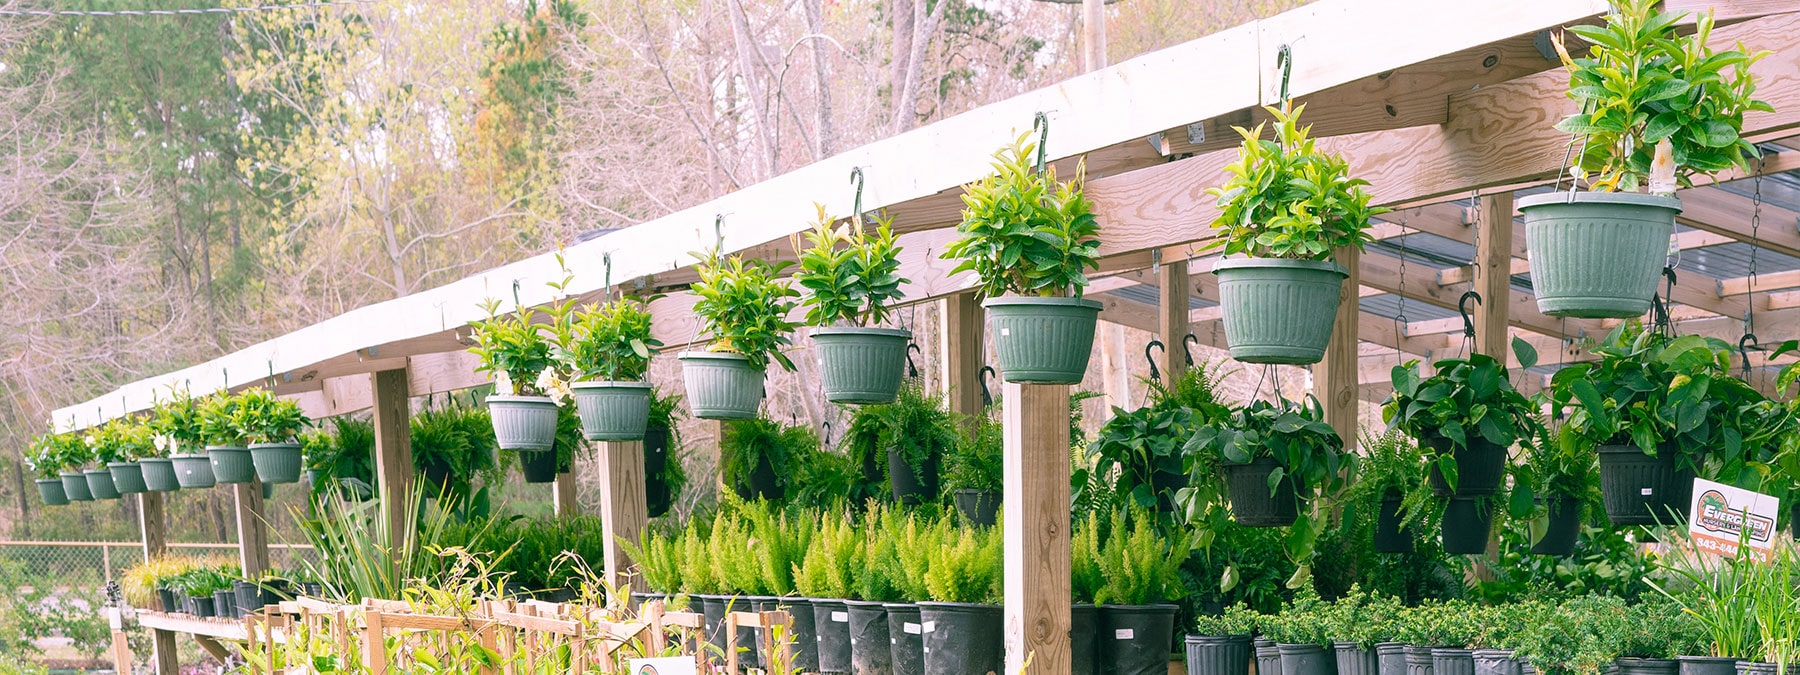 A row of potted plants on wooden posts.